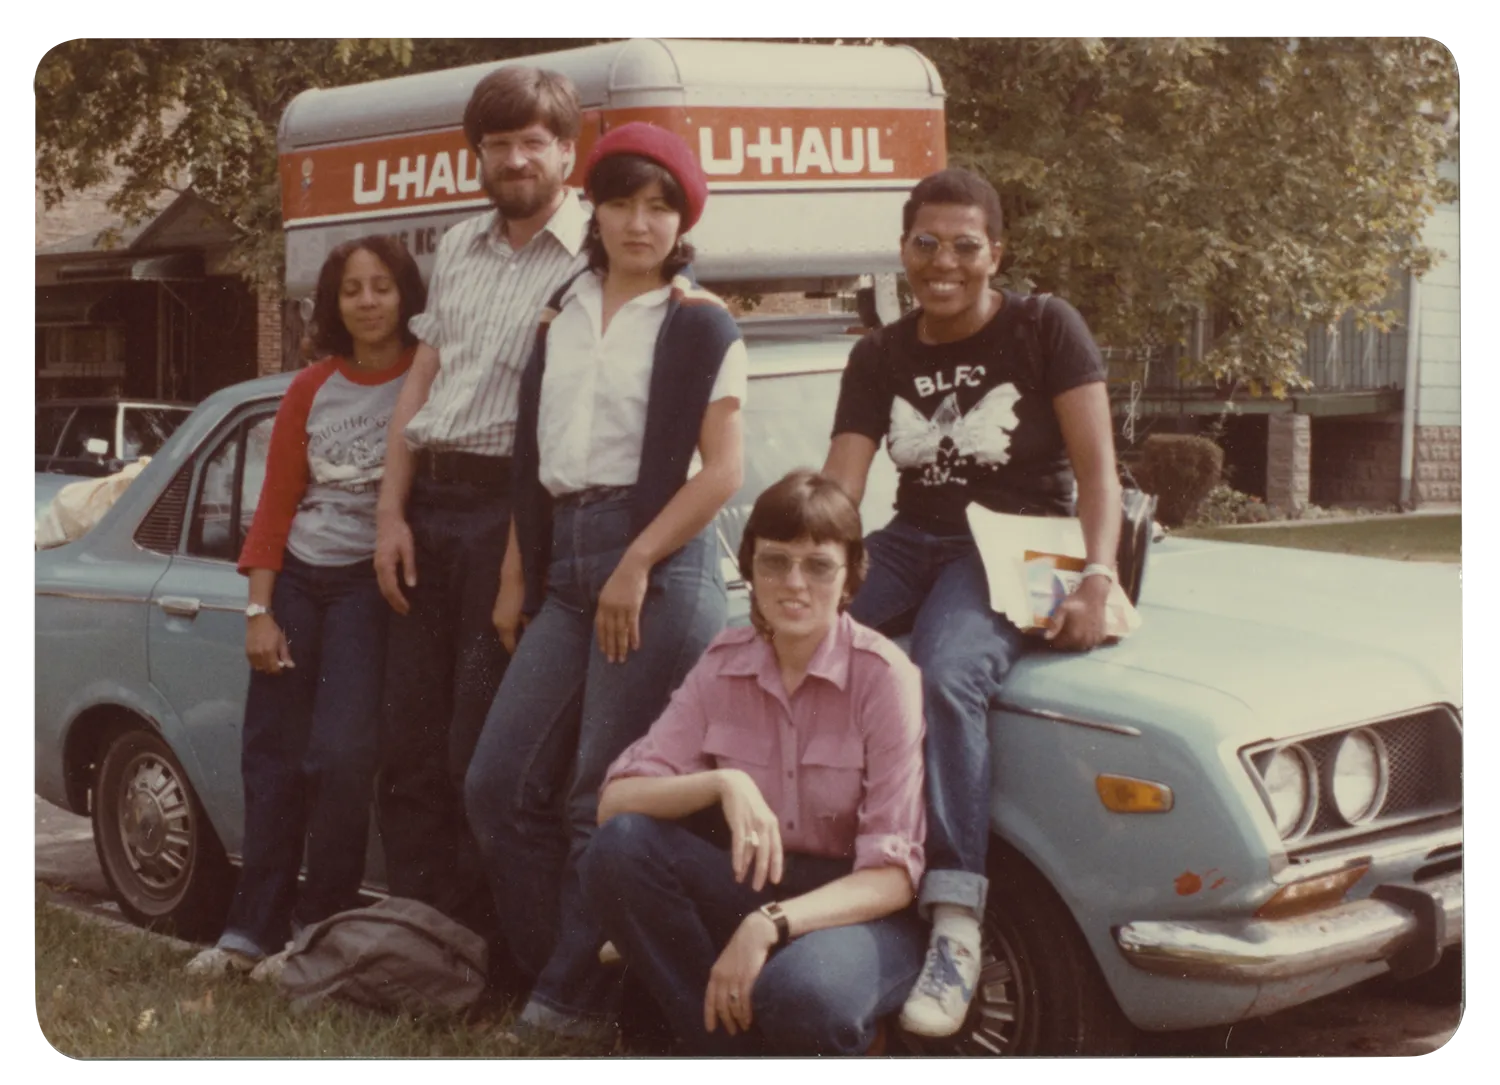 A color photograph of a multiracial group of friends standing in front of a U-Haul truck.